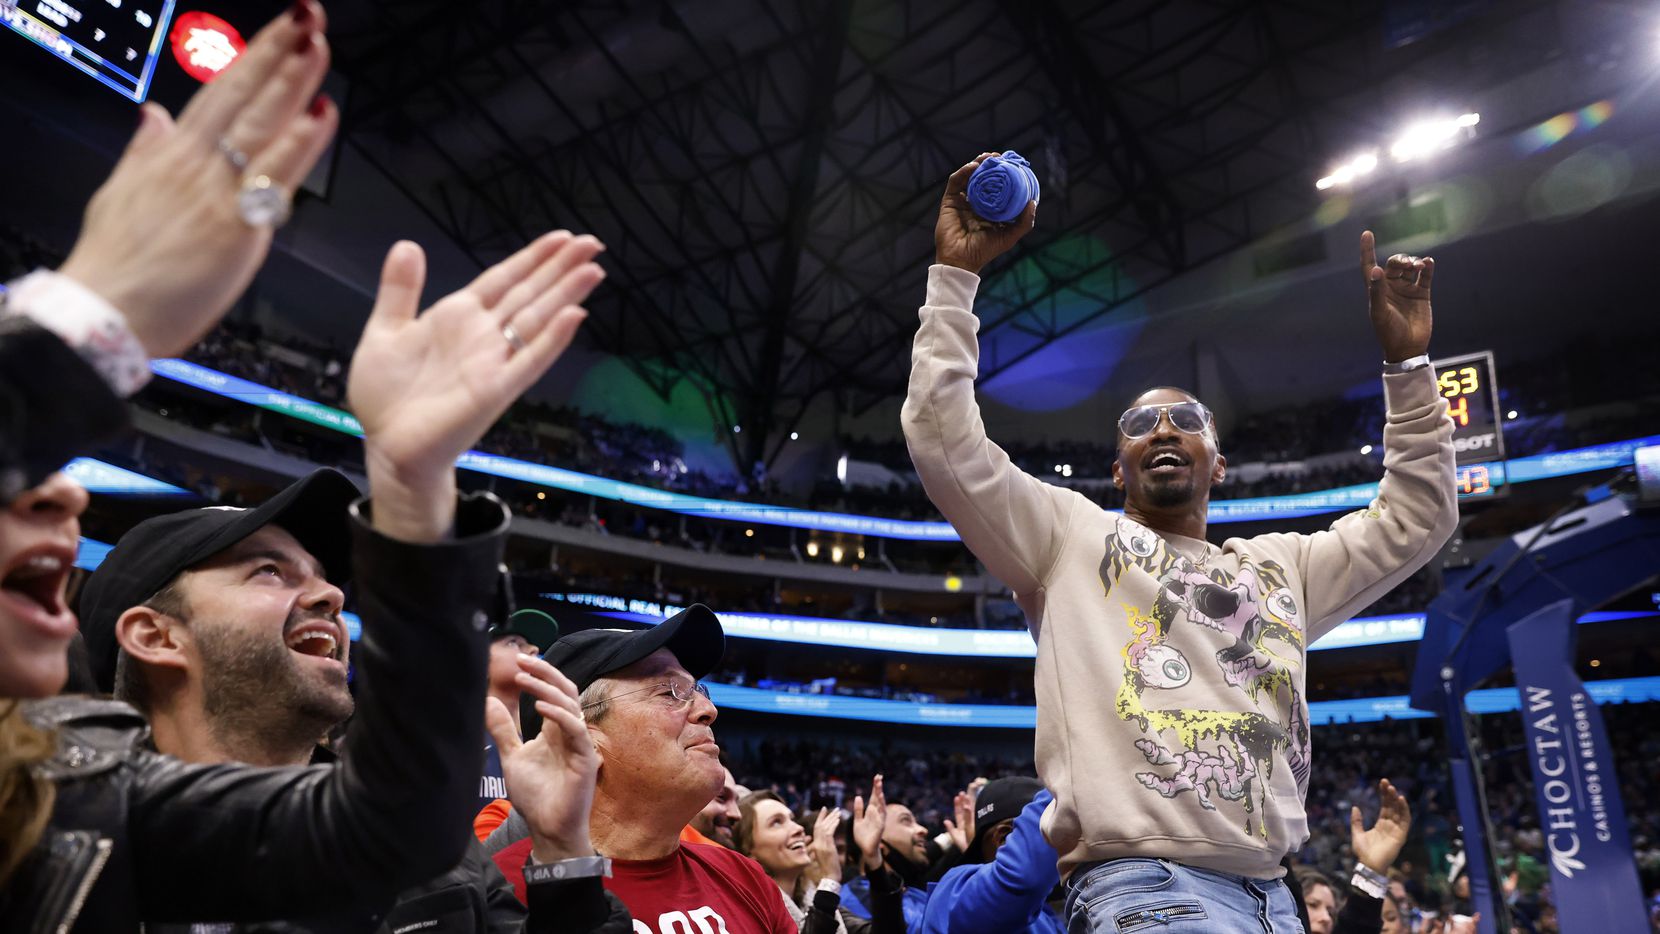 Actor Jamie Foxx acknowledges cheers from the fans as he's introduced during the first half of the Dallas Mavericks-Washington Wizards game at the American Airlines Center in Dallas, November 27, 2021. (Tom Fox/The Dallas Morning News)